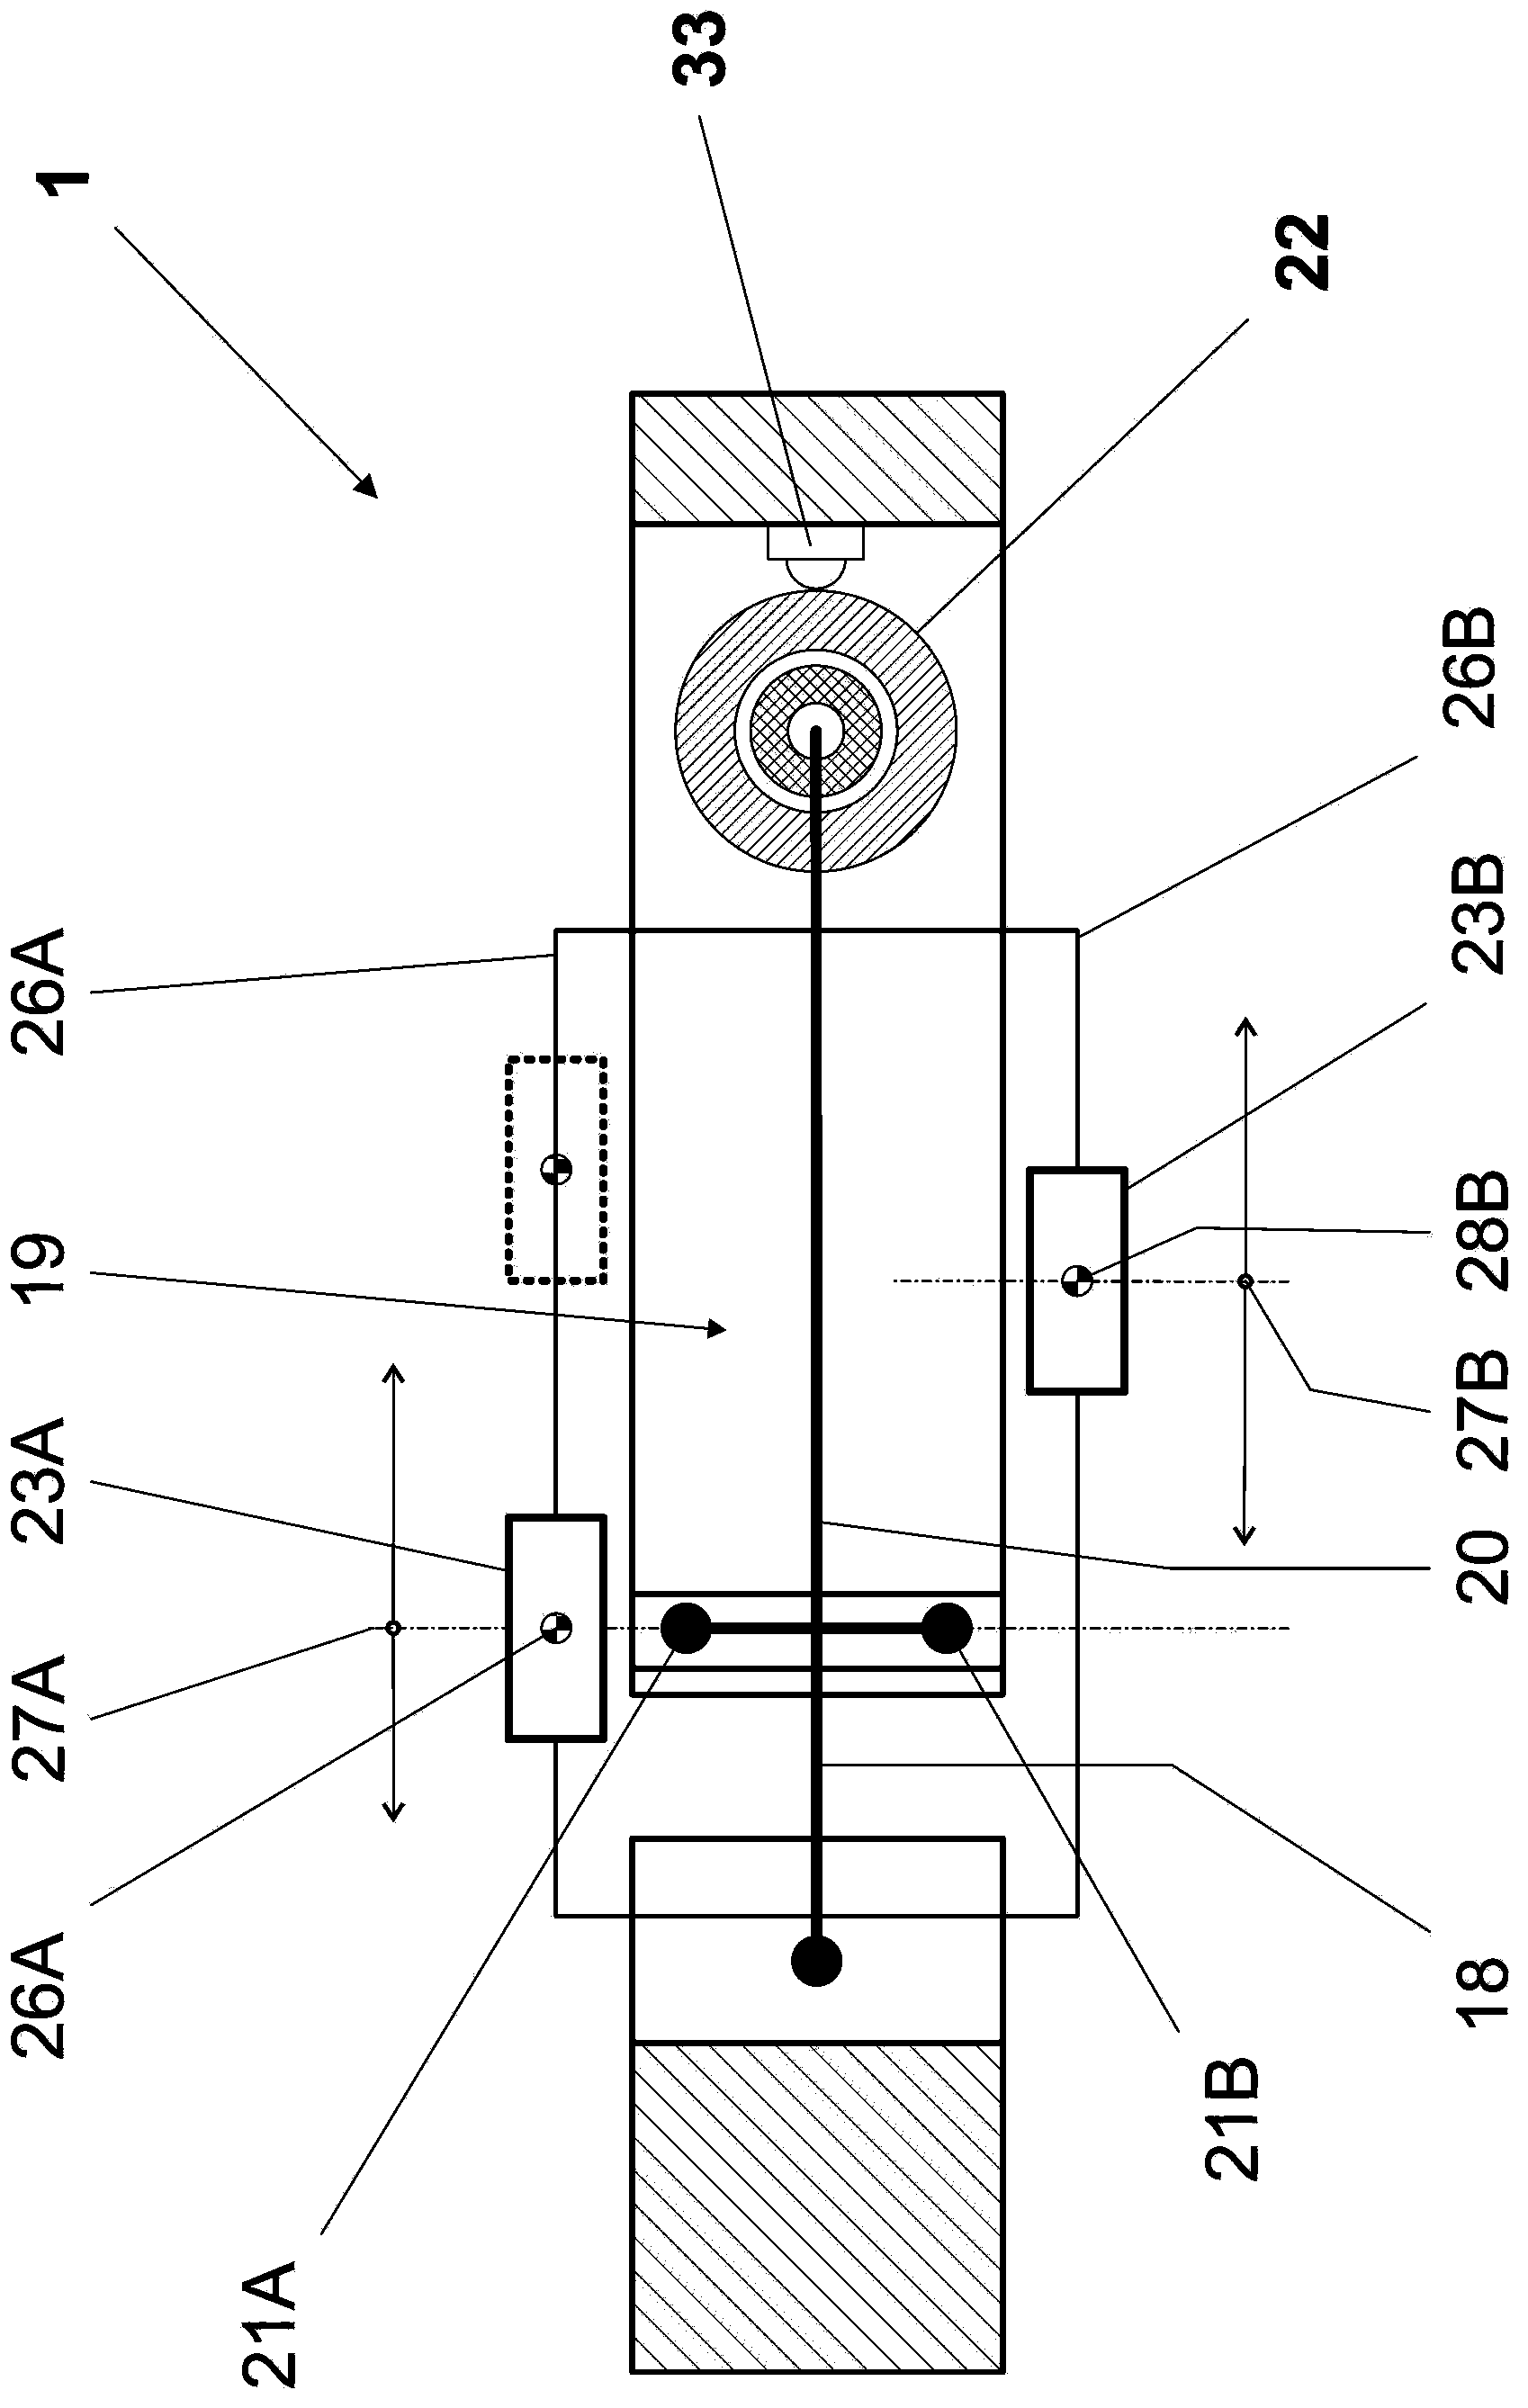 Force-measuring device with sliding weight